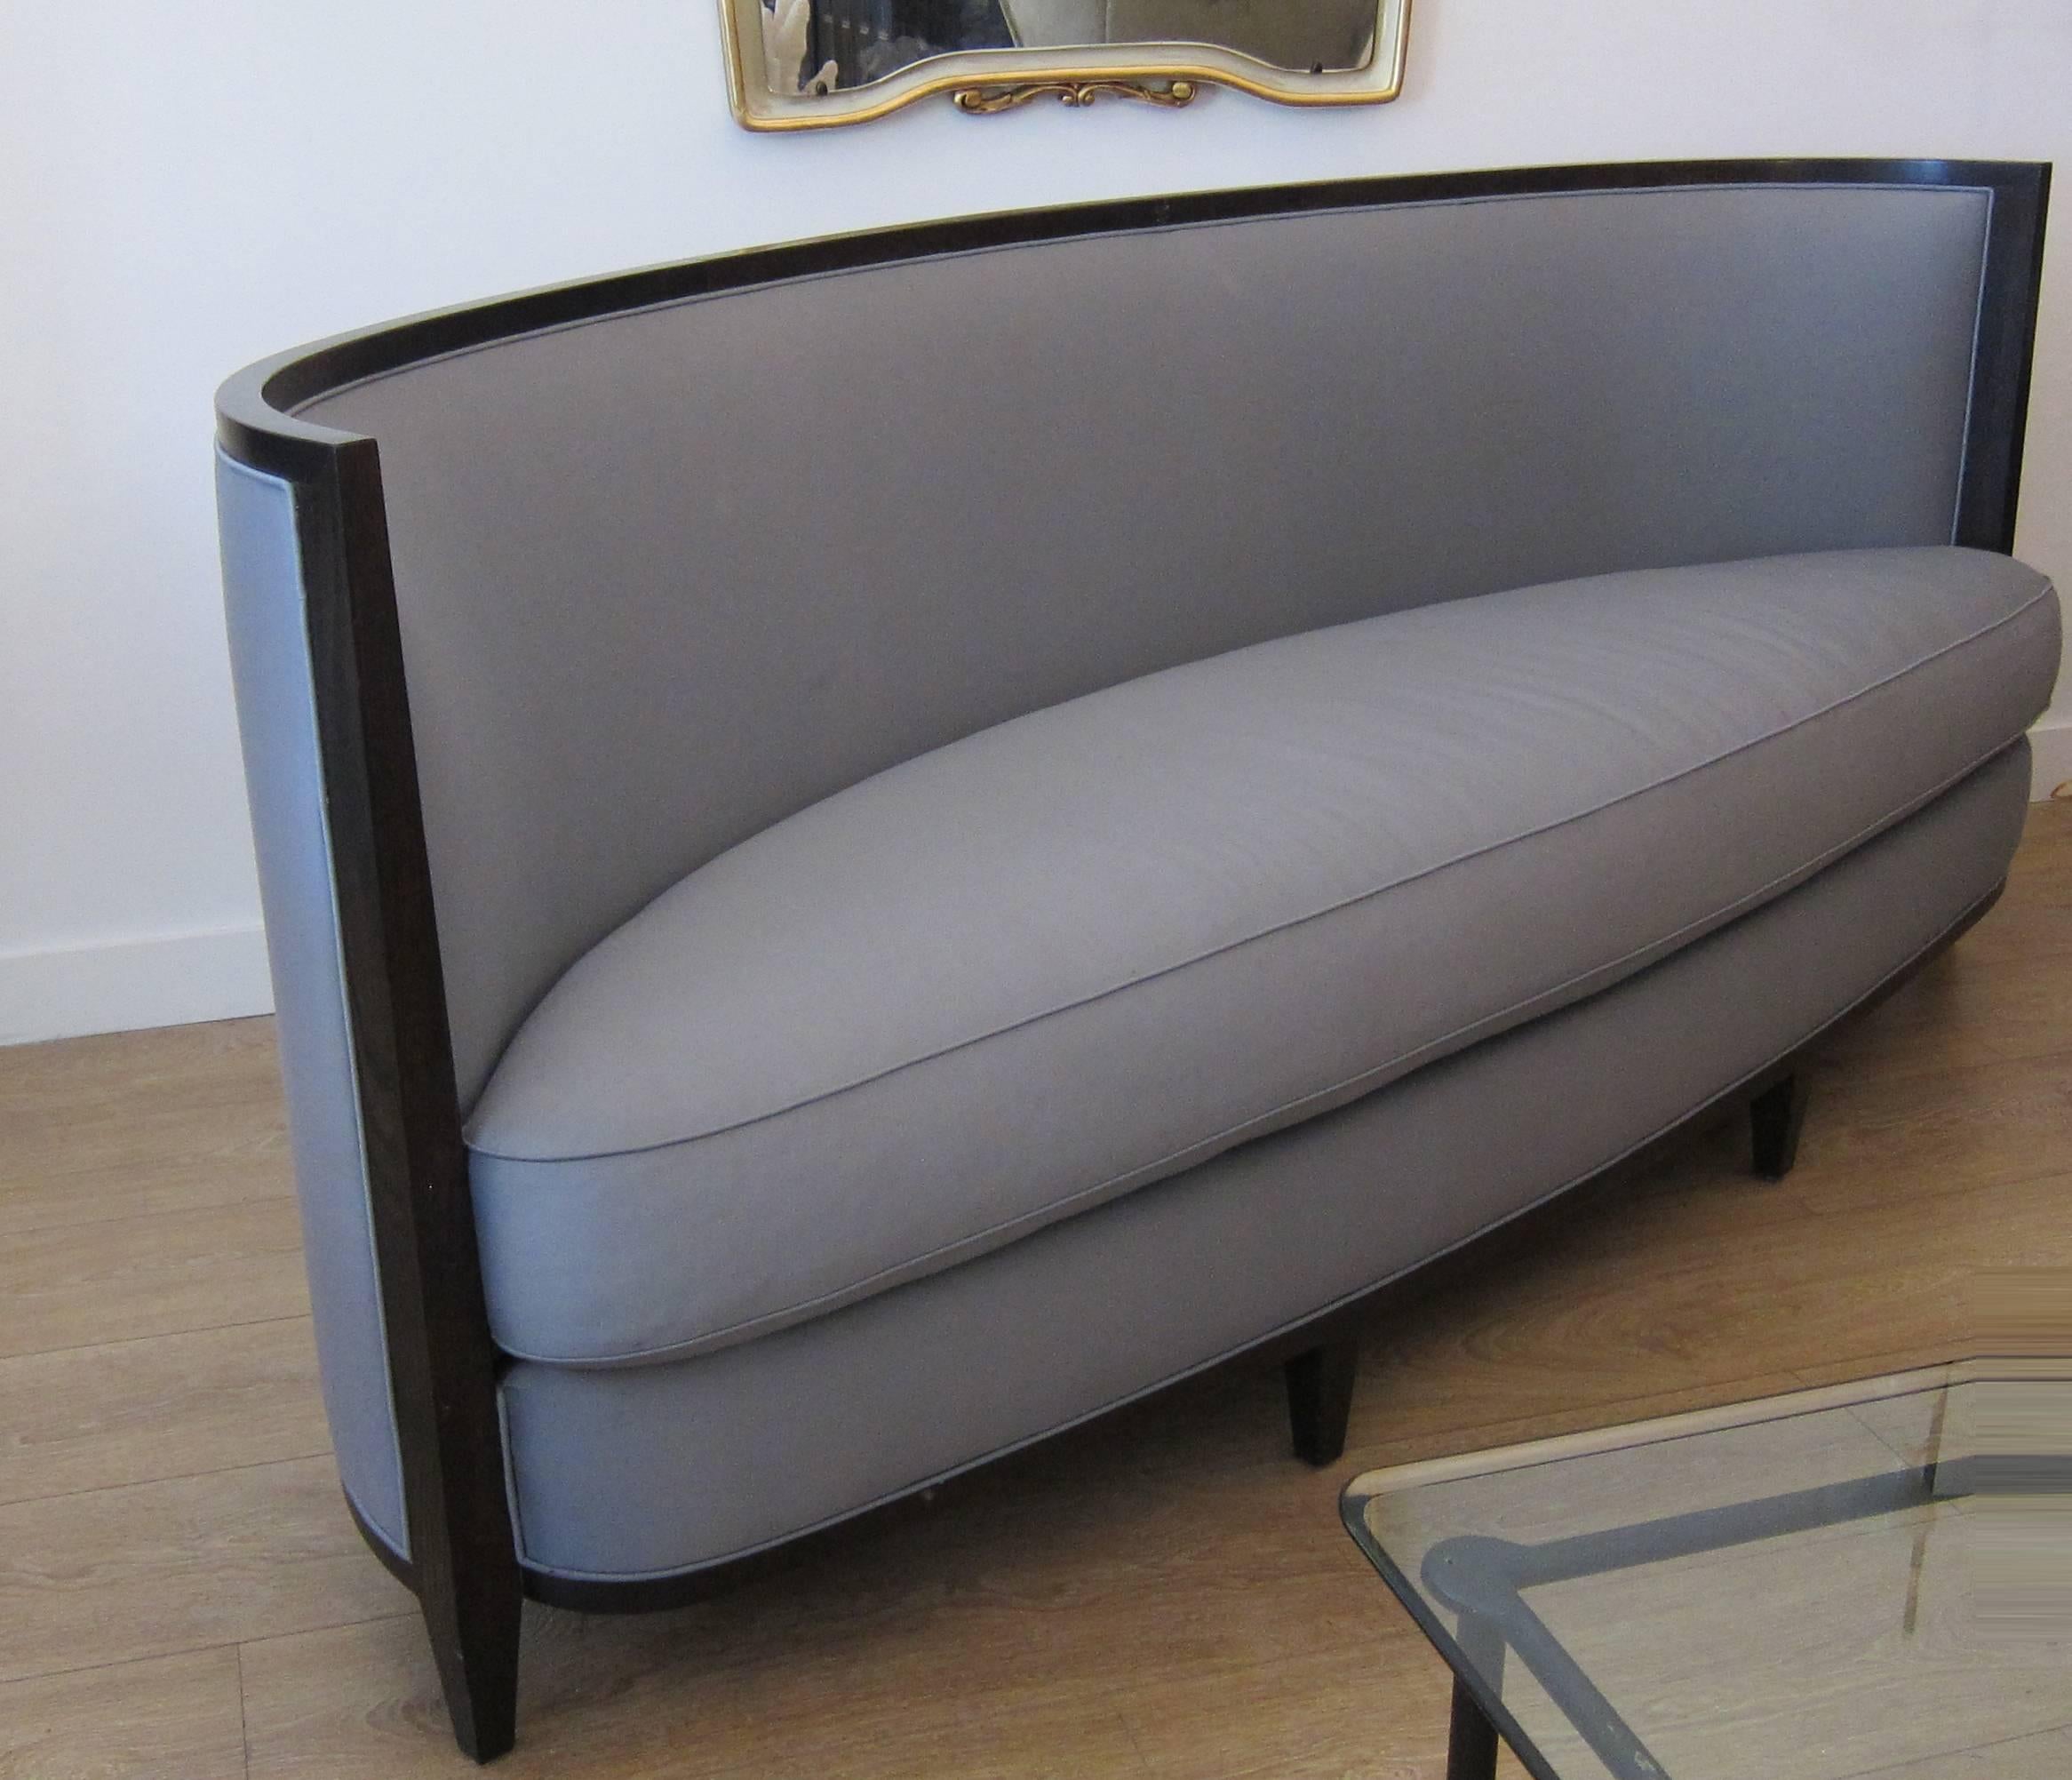 A large pair of crescent moon sofas by Andree Putman for Ralph Pucci. Solid stained oak frame with original blue satin upholstery.
Please feel free to call us for a full condition report.